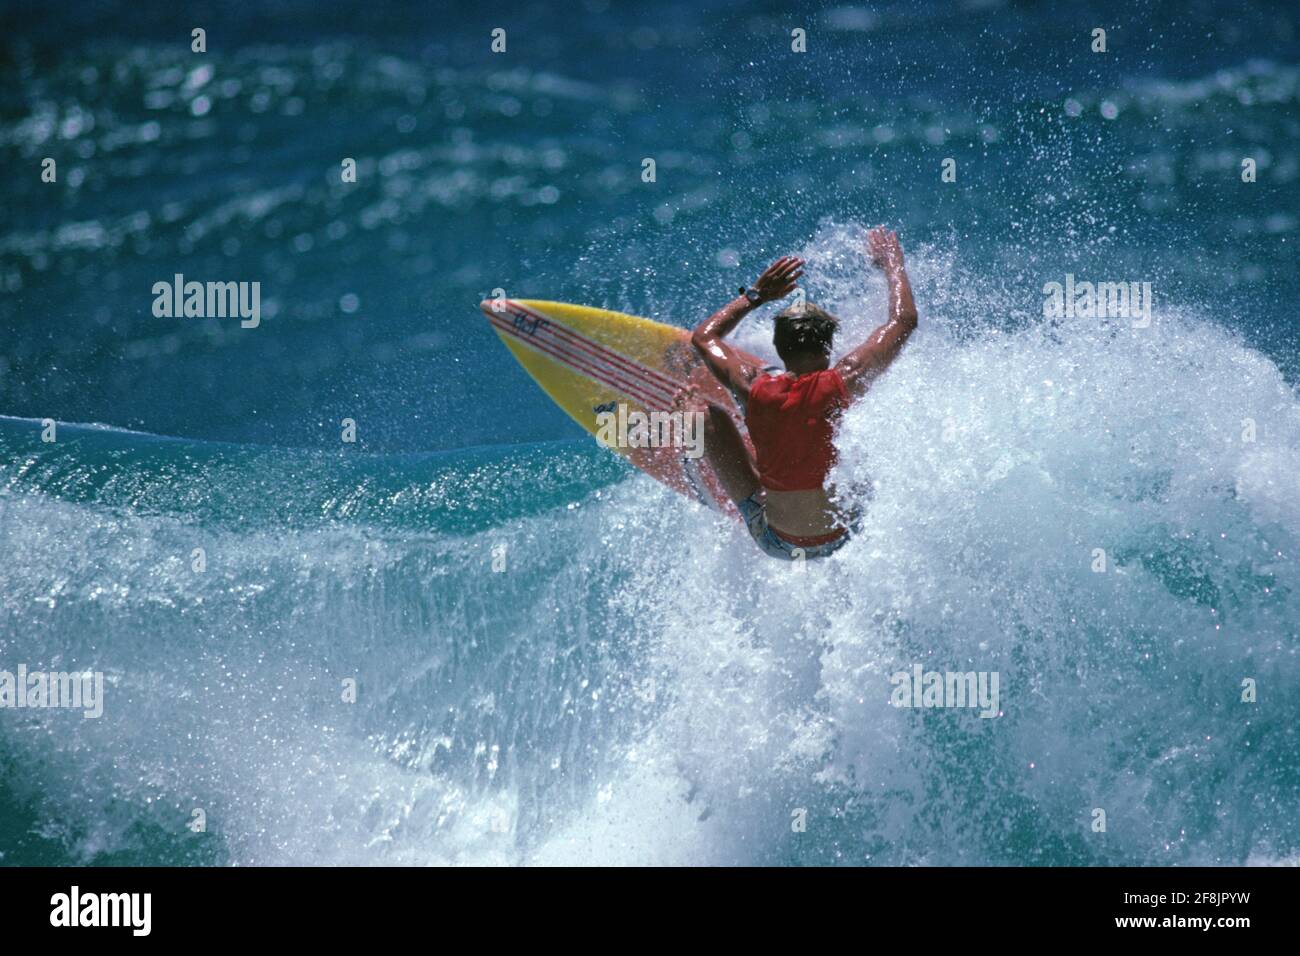 Surfing. Male surfer on crest of a wave. Stock Photo